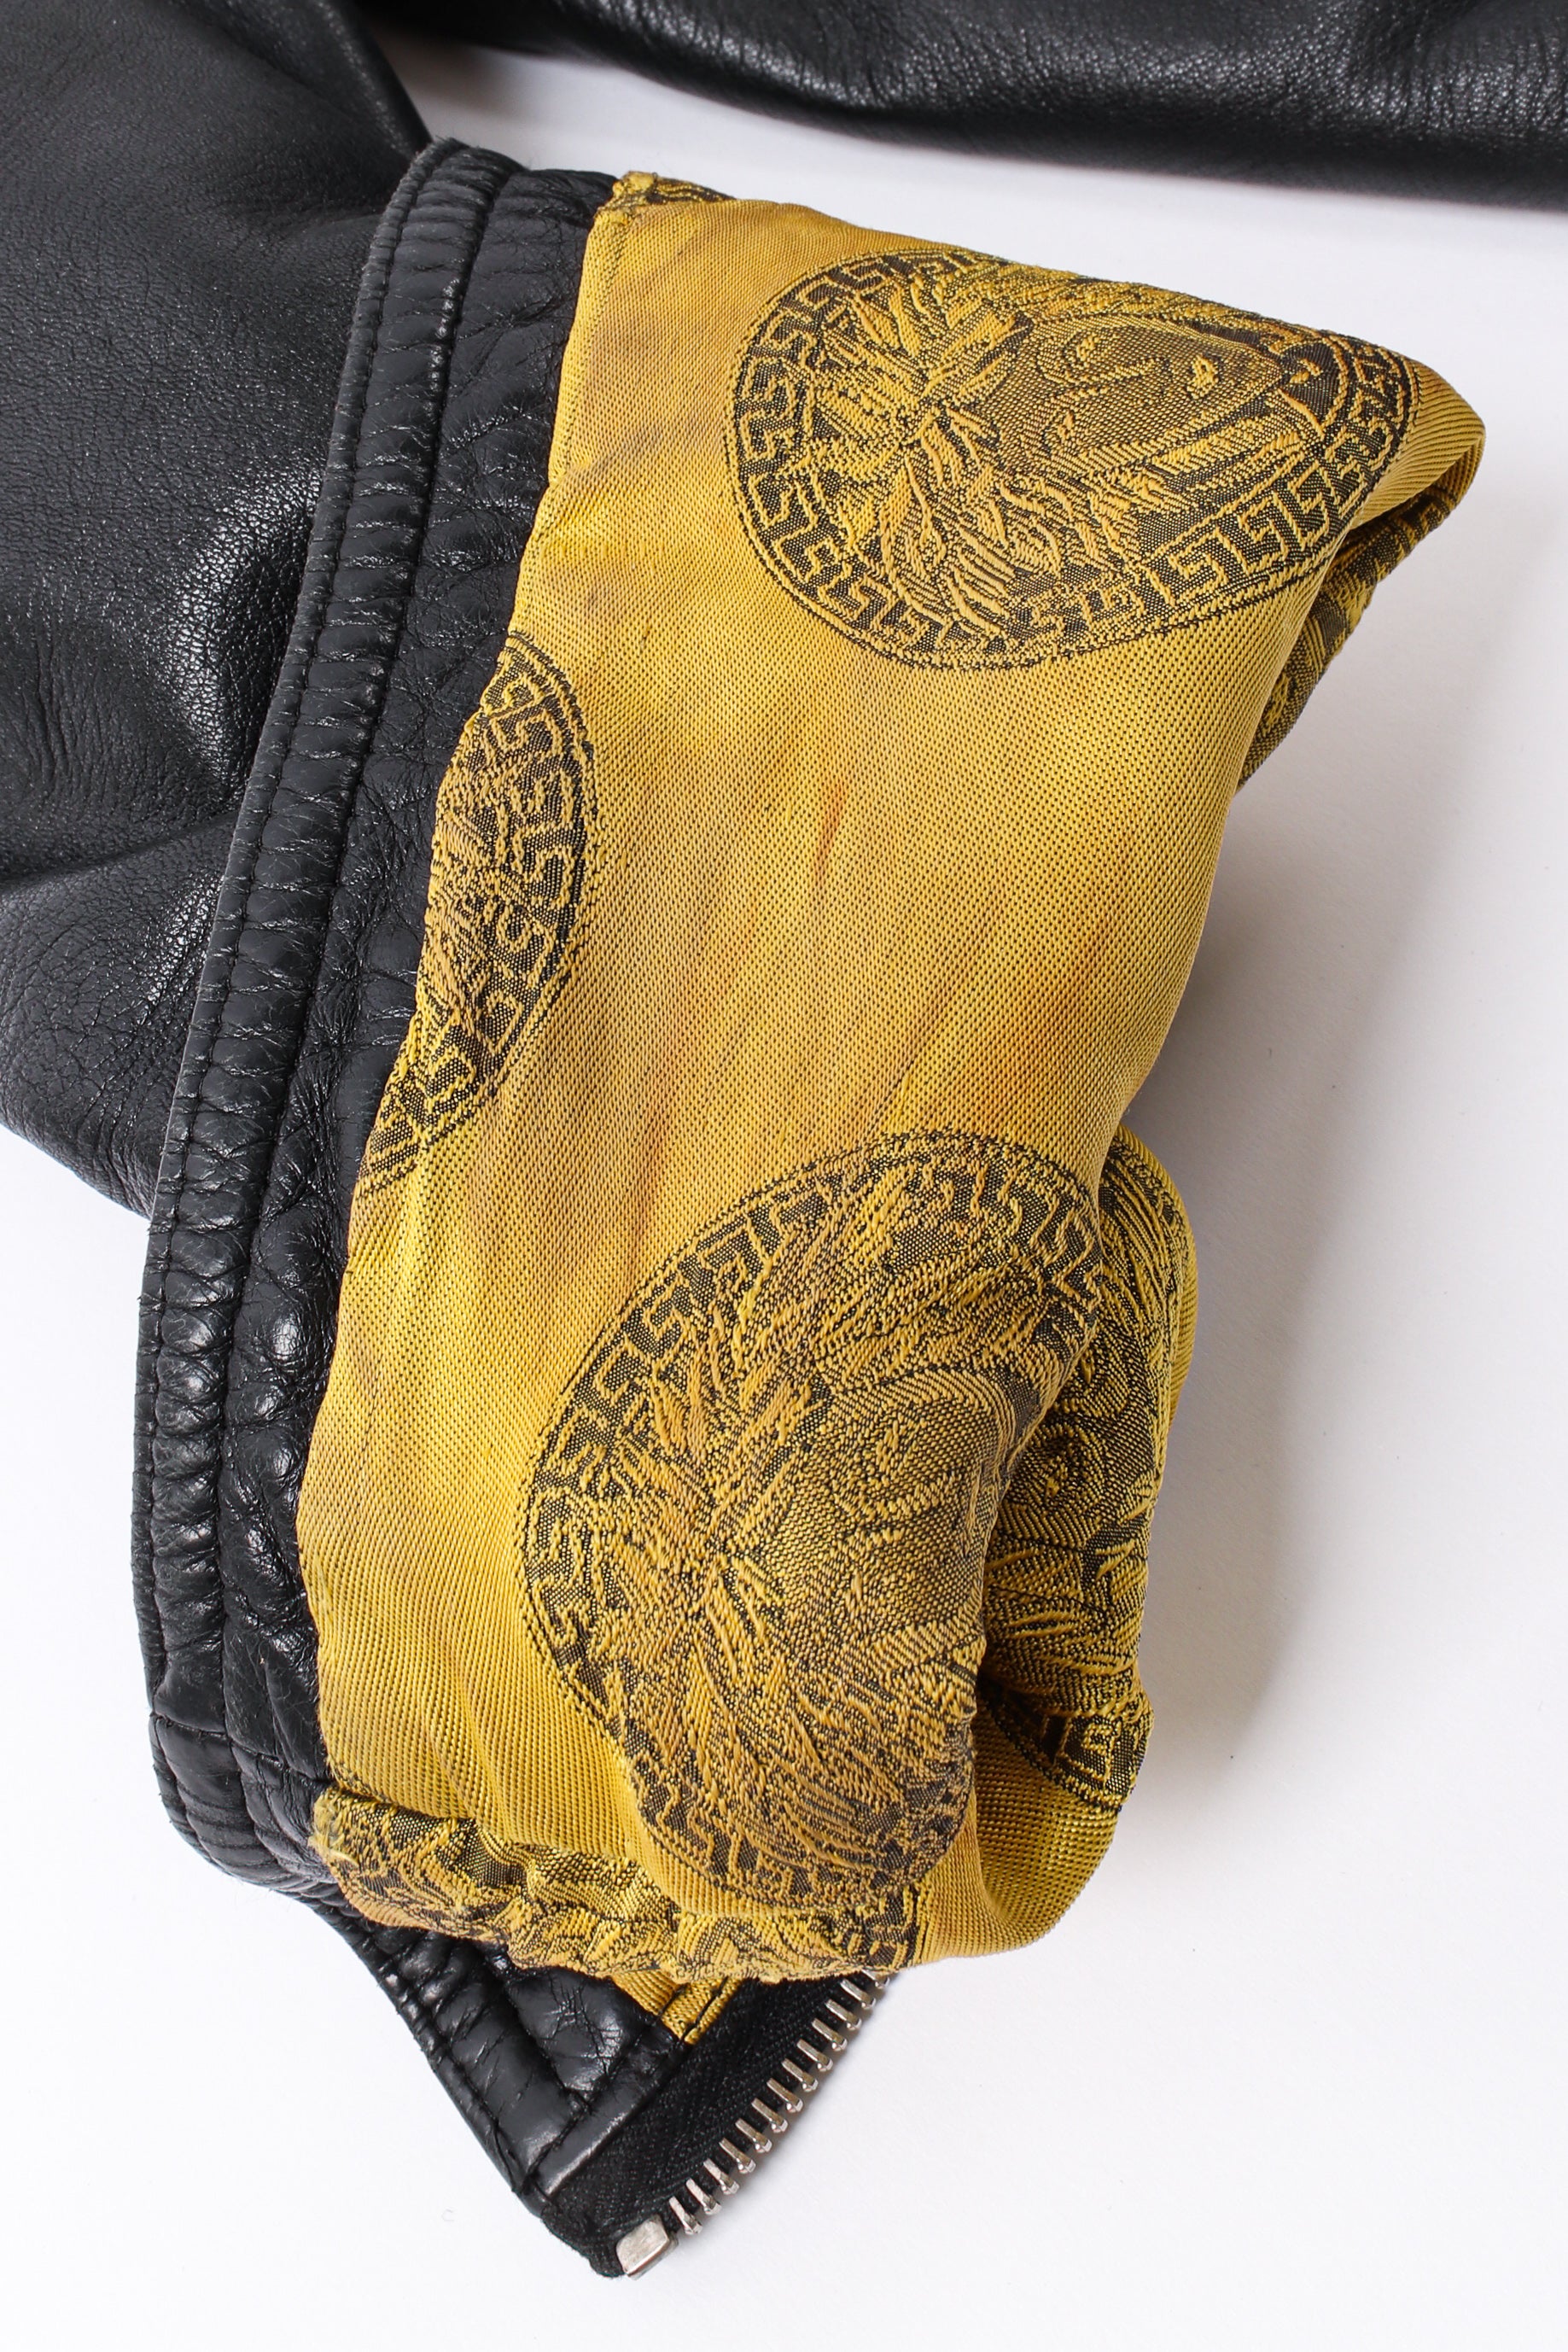 Vintage Gianni Versace Leather Bomber Jacket stained sleeve detail  @ Recess LA